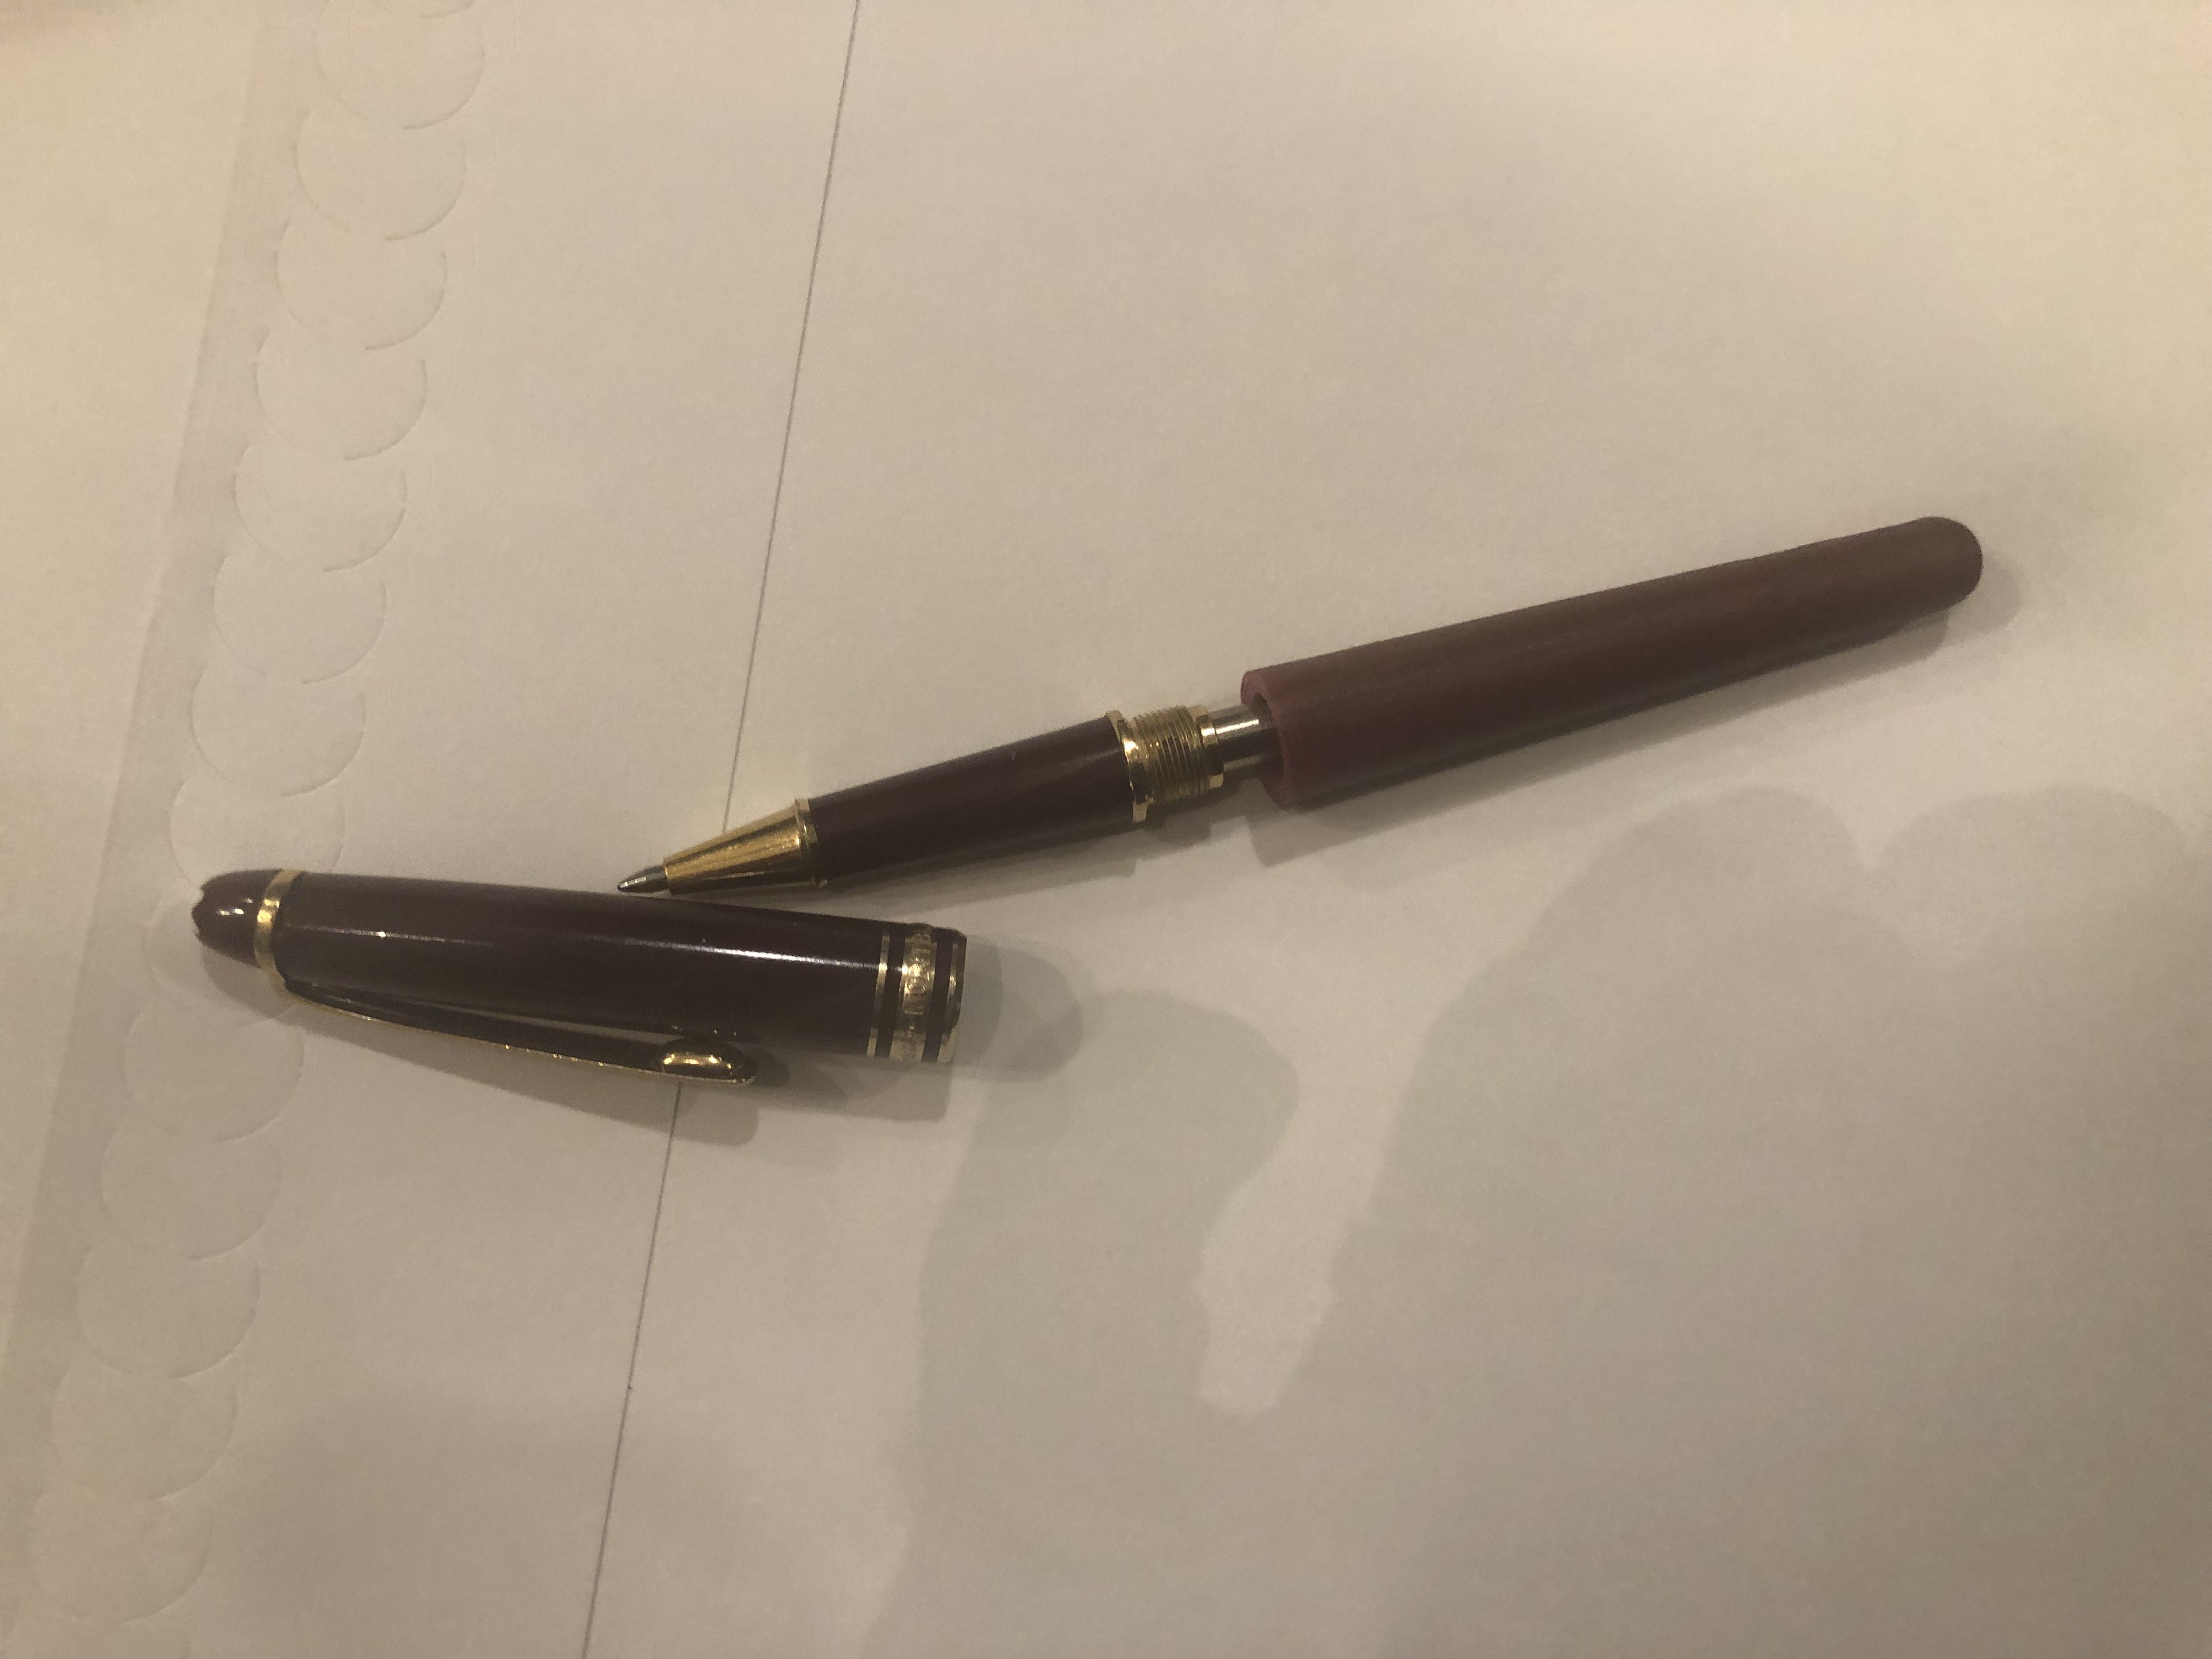 Replacement Barrel for Mont Blanc Roller Ball Pen